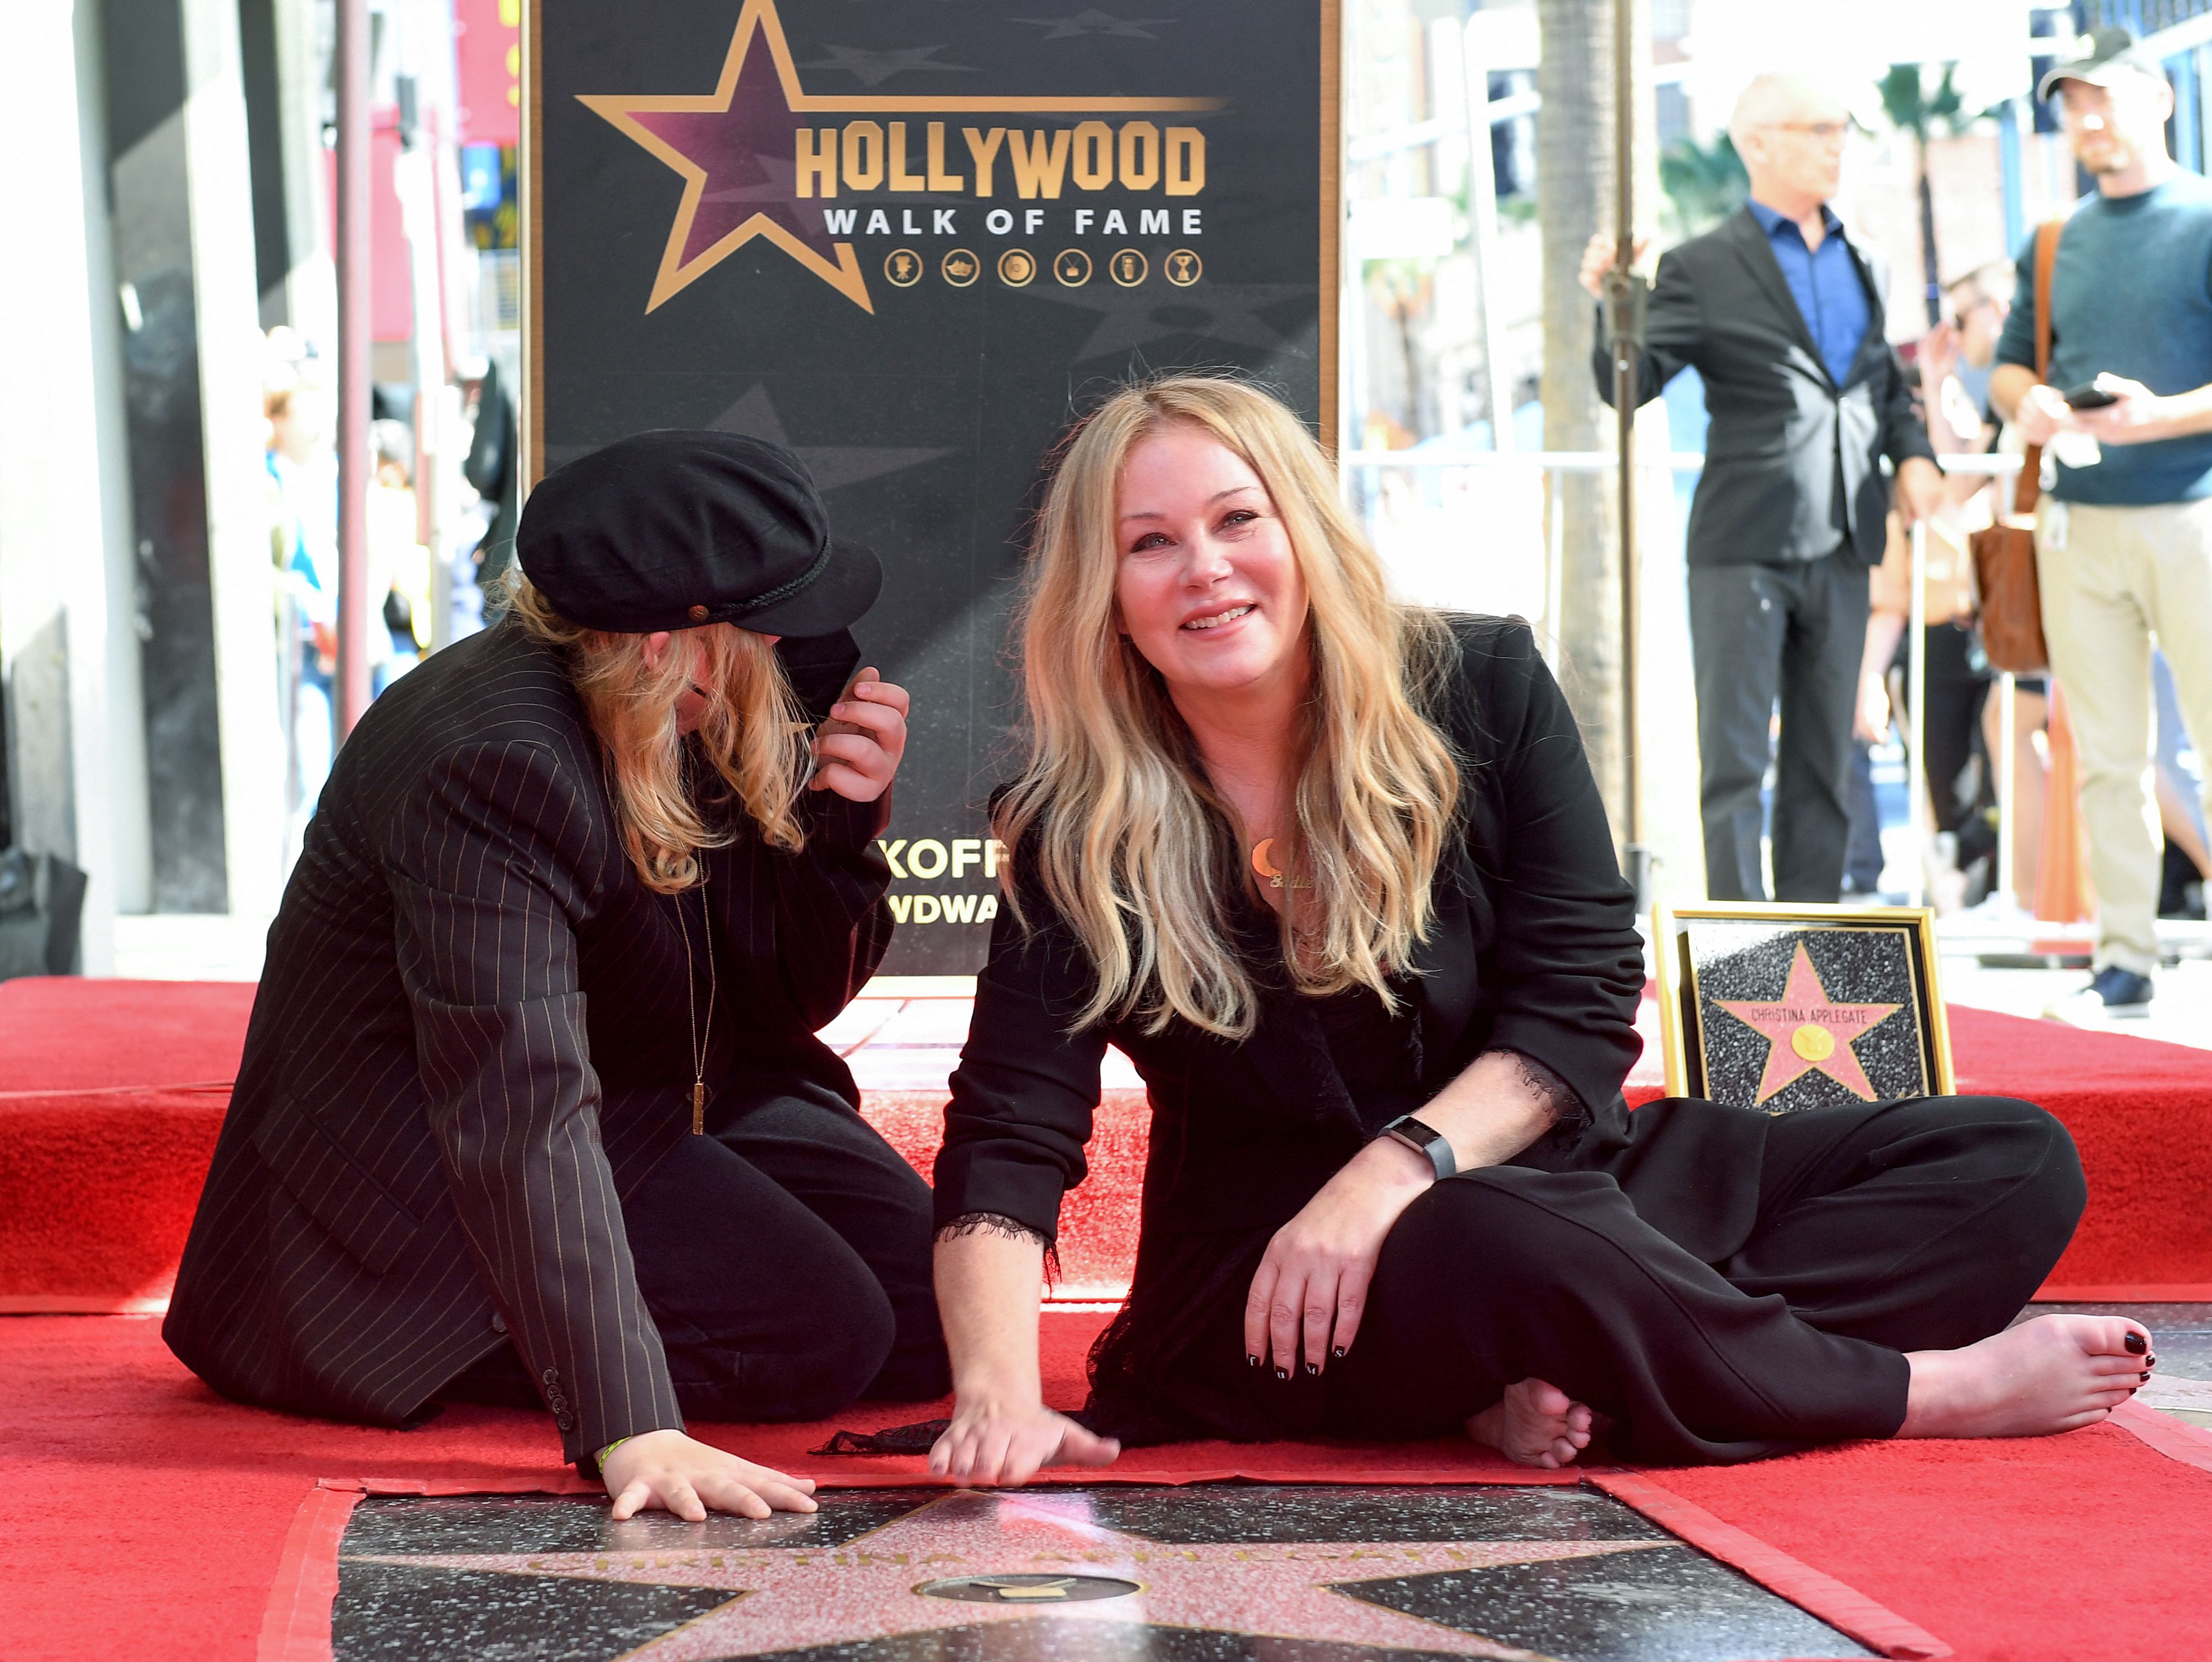 Sadie Grace LeNoble and Christina Applegate pose with the actress’s star during the Hollywood Walk of Fame Ceremony in Los Angeles, California, on November 14, 2022. | Source: Getty Images